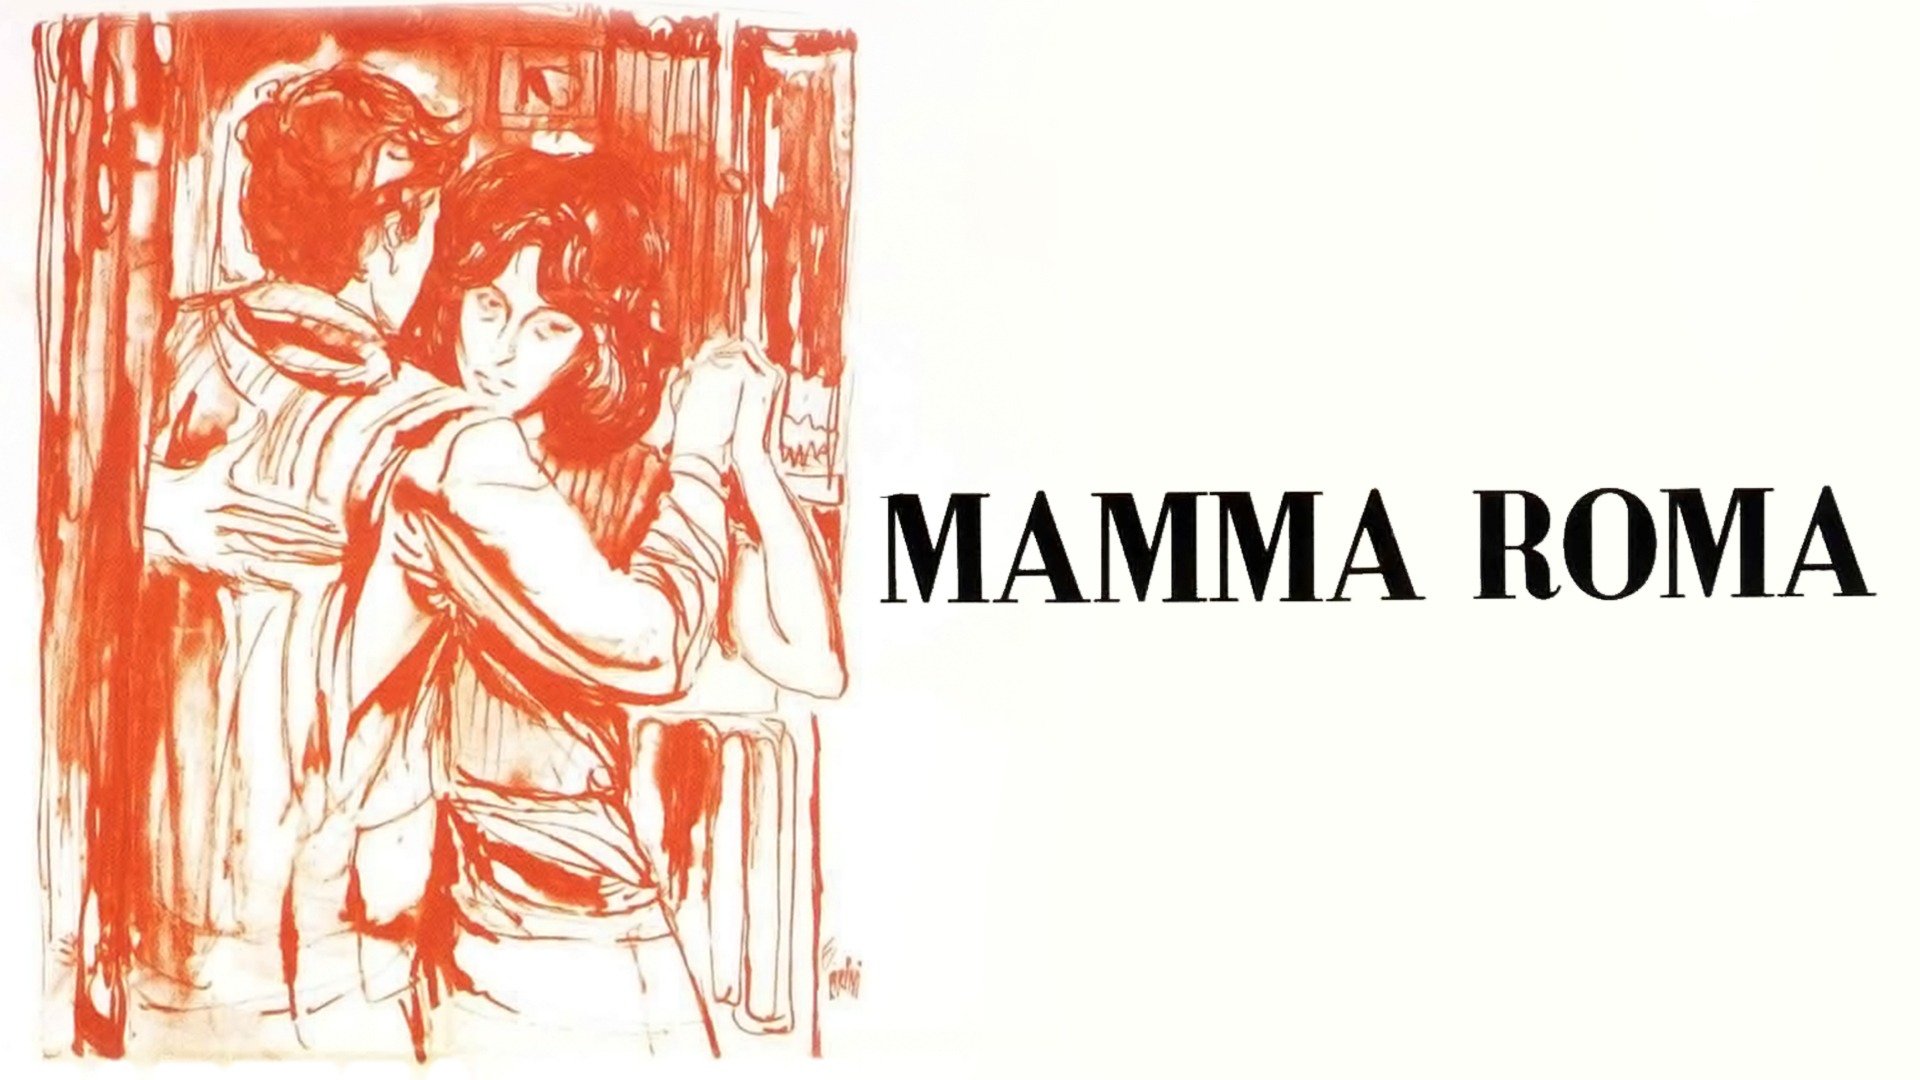 34-facts-about-the-movie-mamma-roma